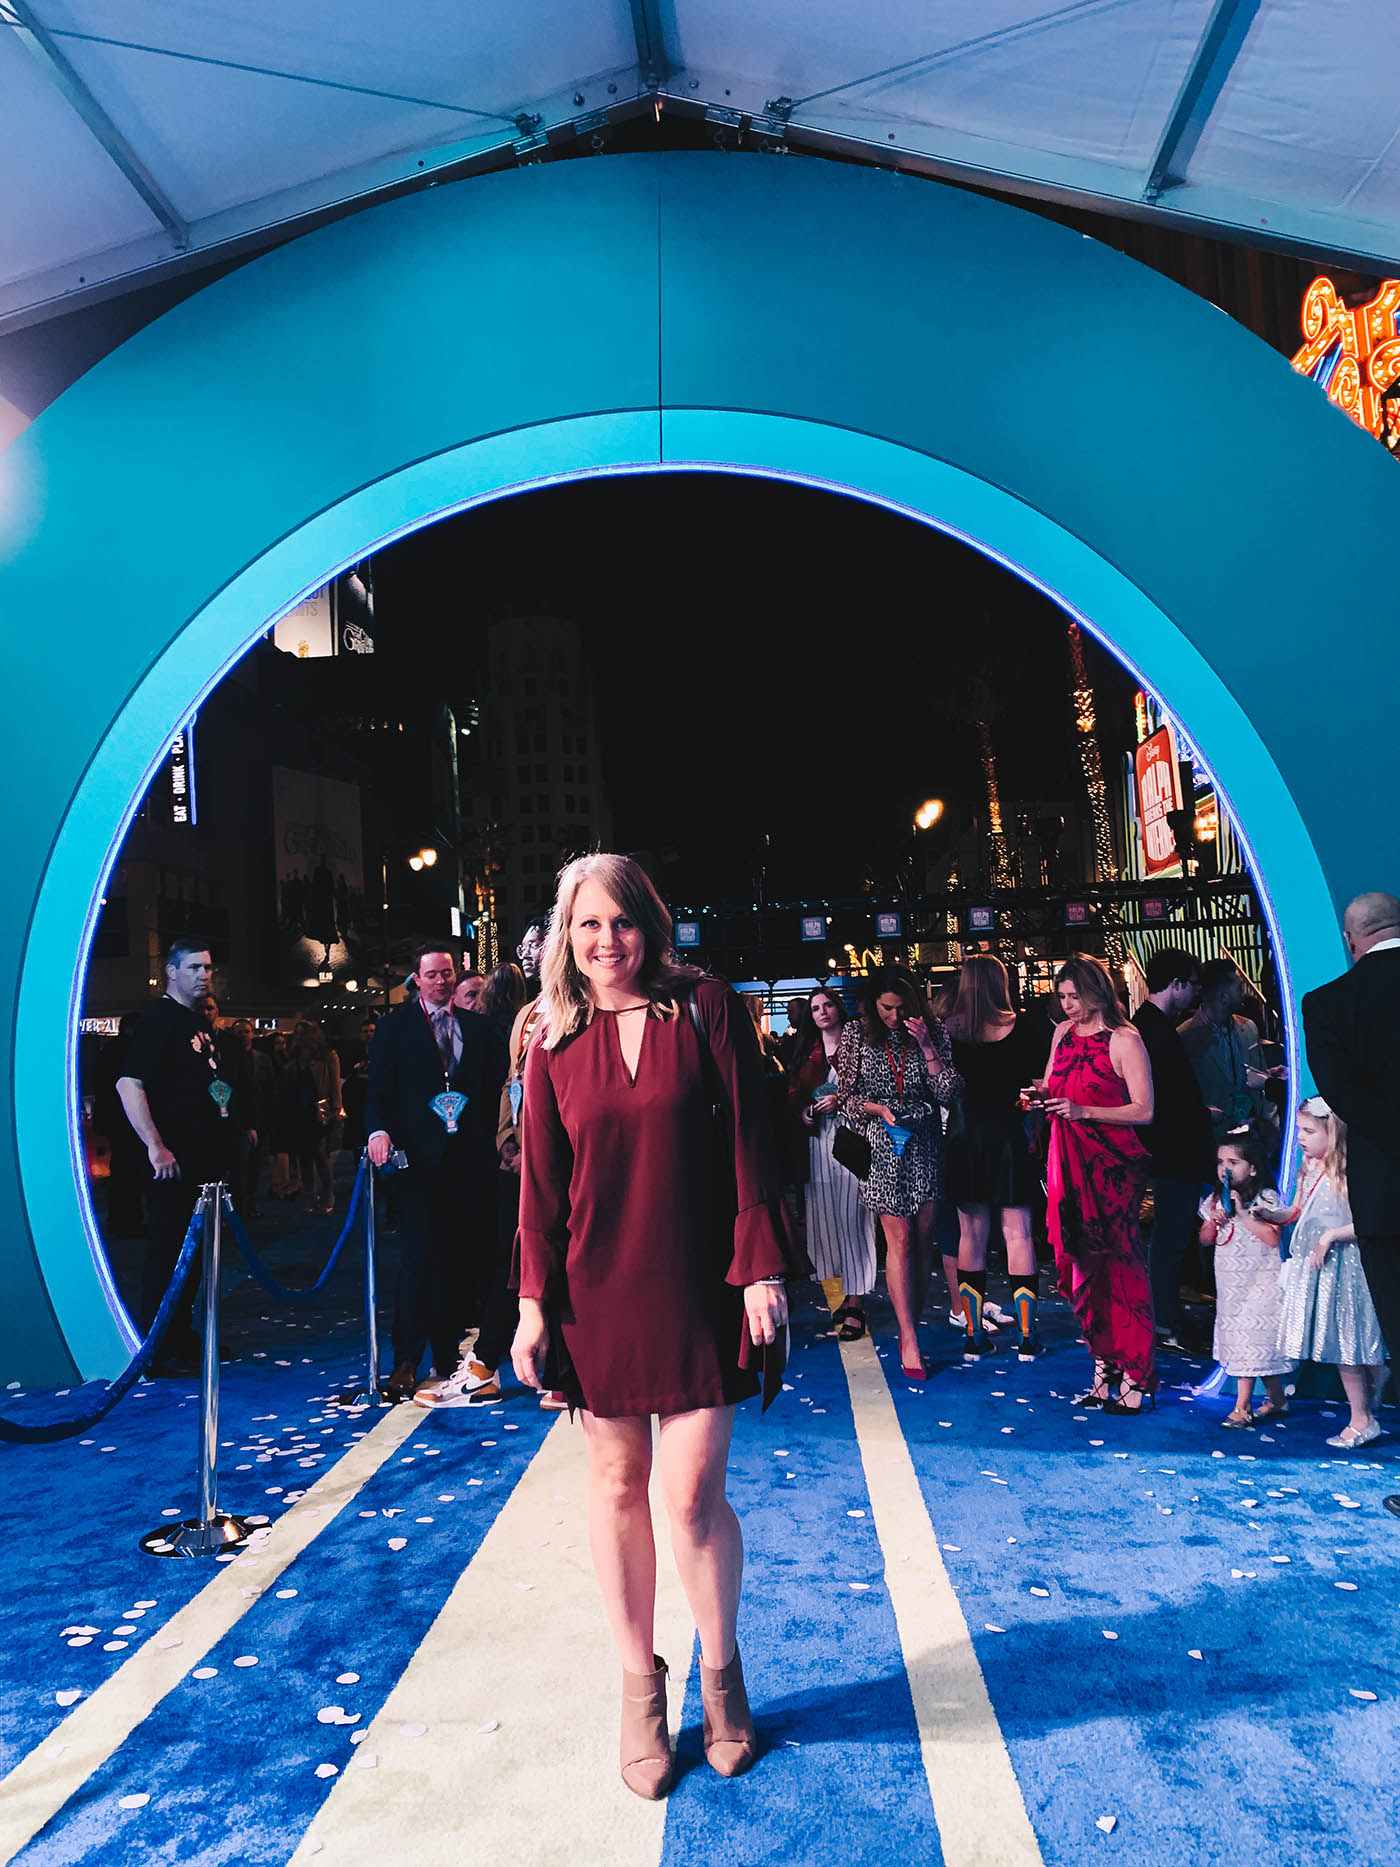 Ralph Breaks the Internet World Premiere - a blogger's experience on the blue carpet